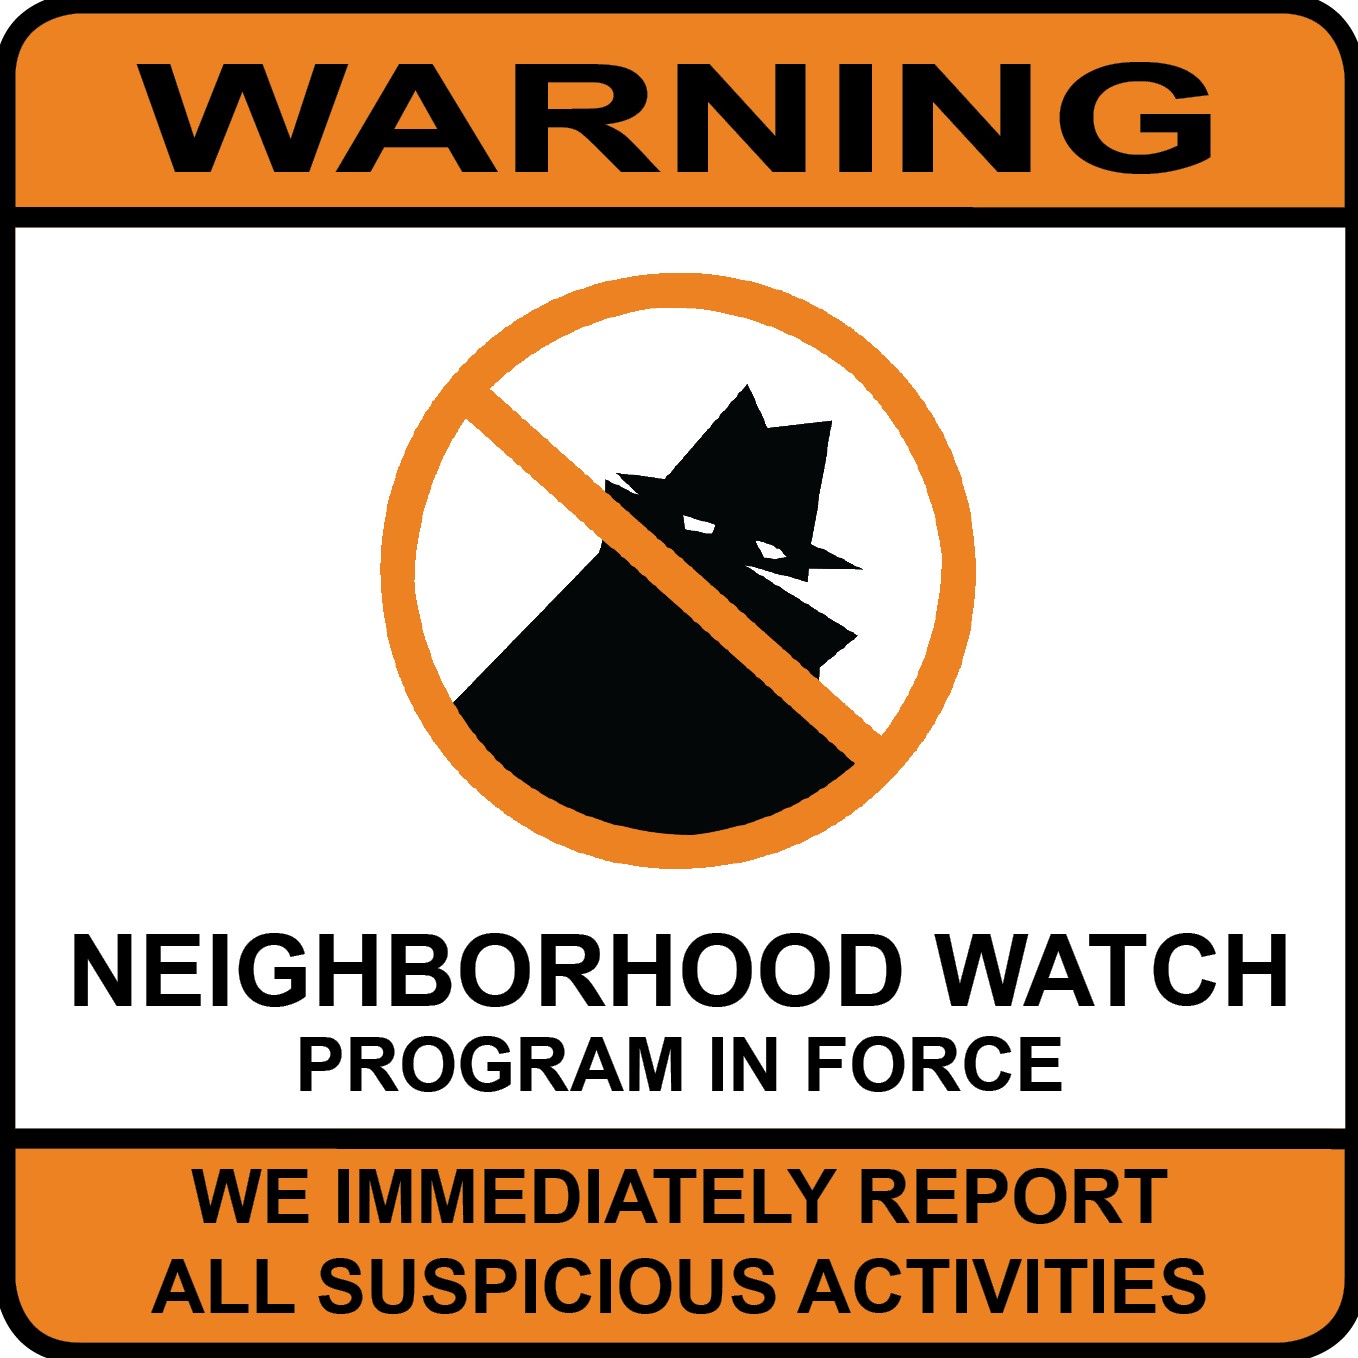 Neighborhood Watch Meeting: Every Third Tuesday of the month